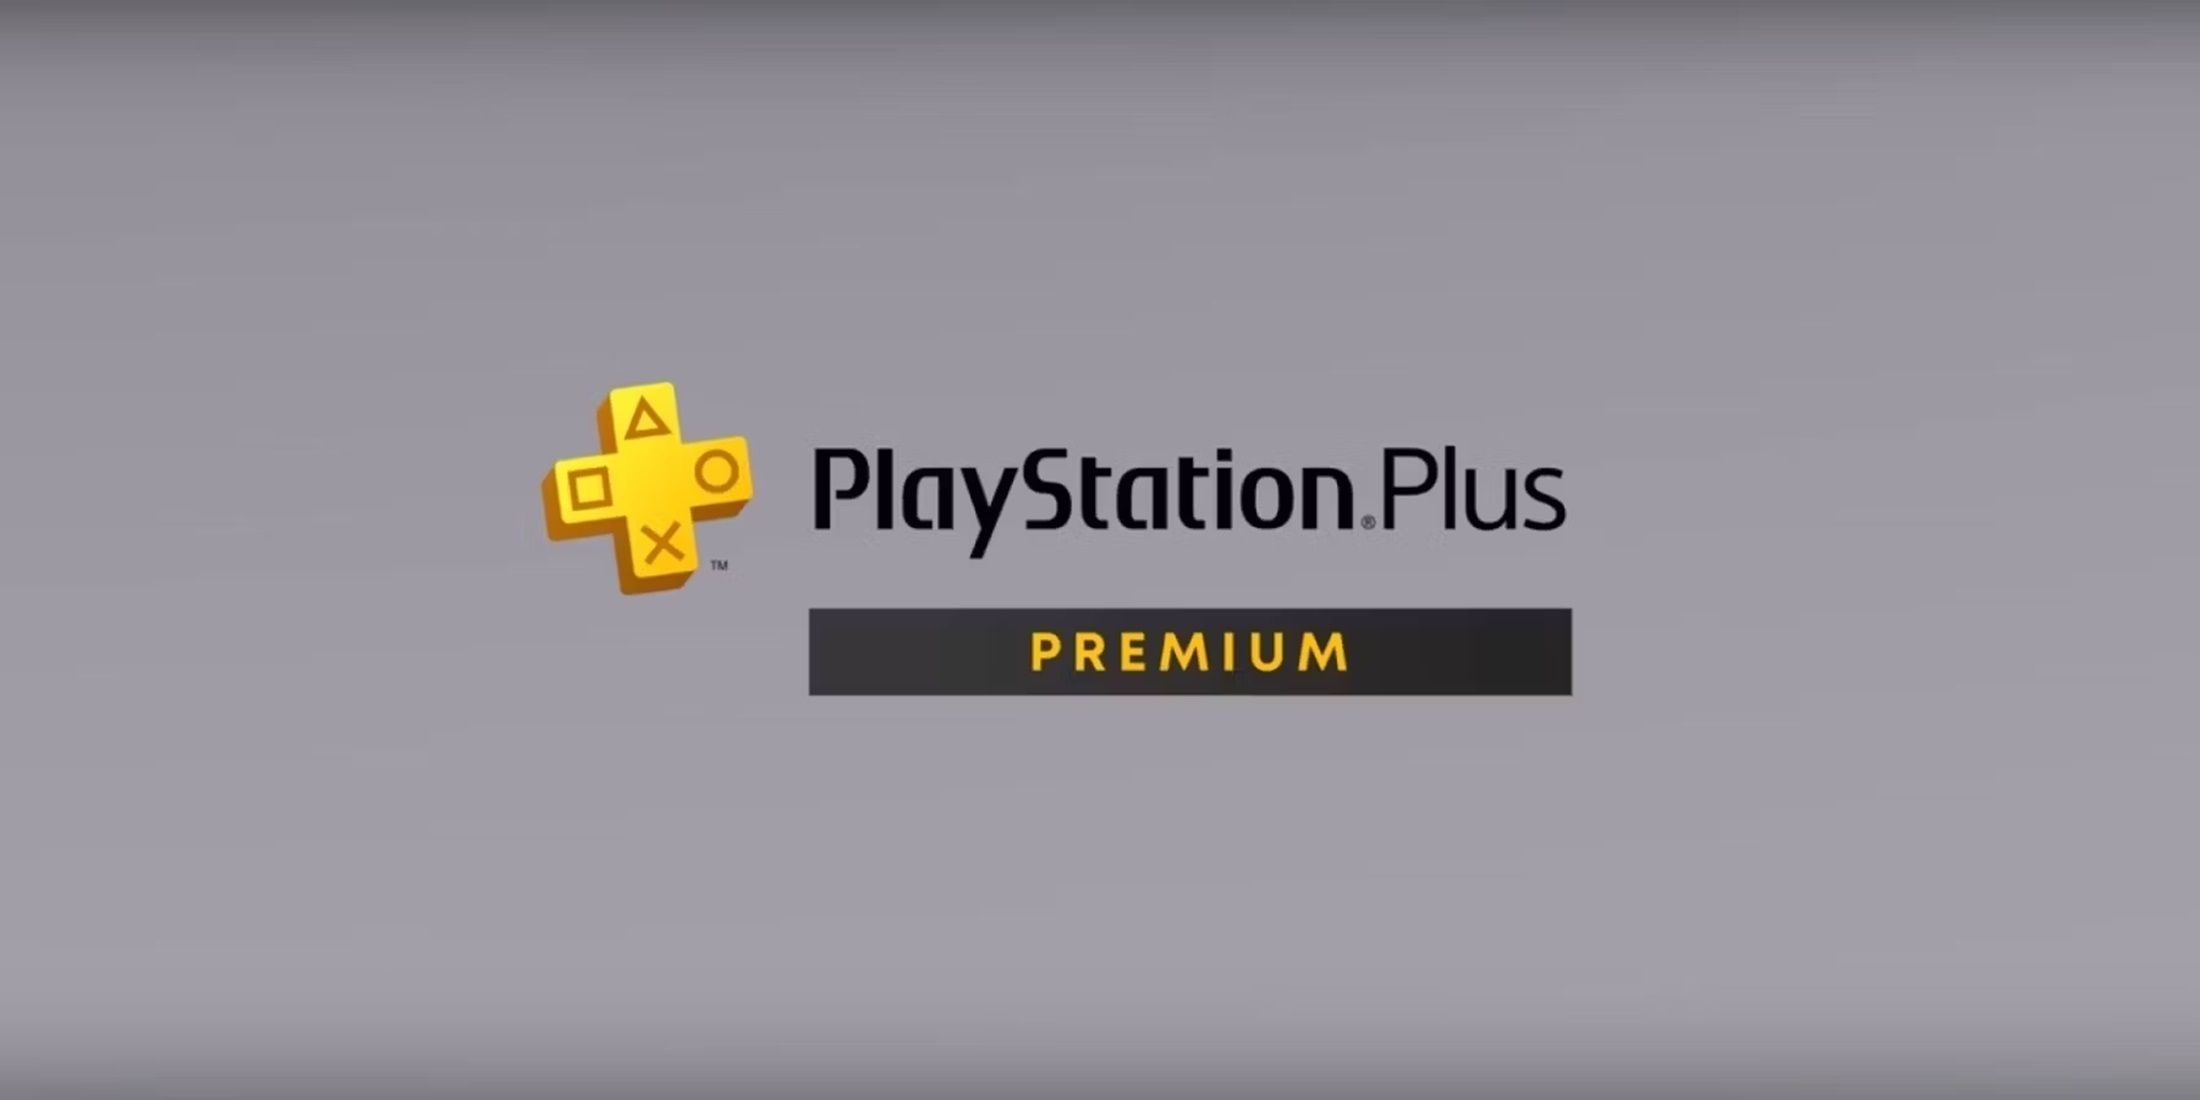 ps plus premium lego star wars 2 missing on ps4